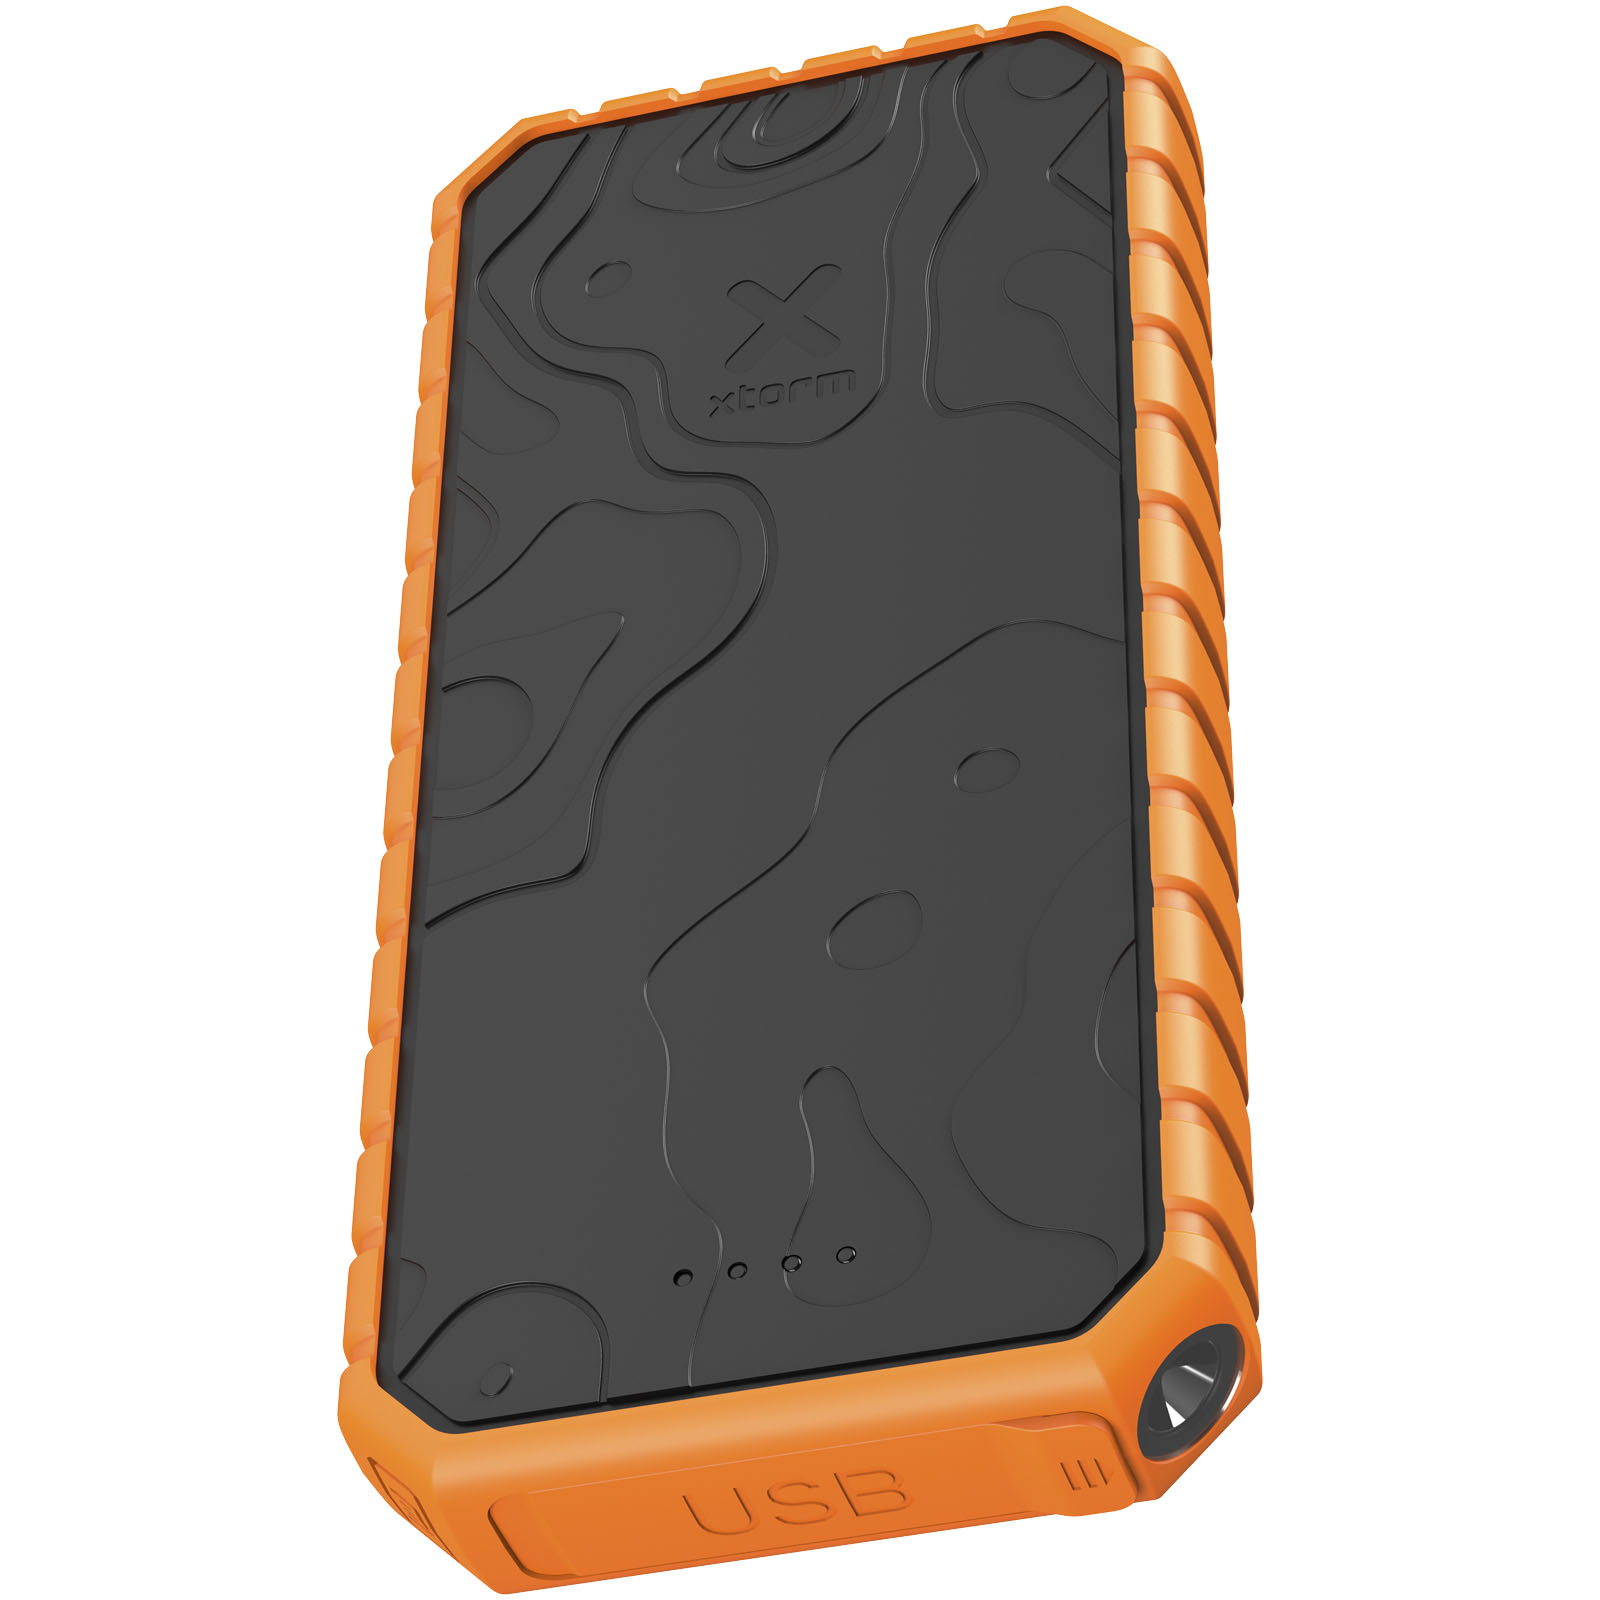 Advertising Powerbanks - Xtorm XR202 Xtreme 20.000 mAh 35W QC3.0 waterproof rugged power bank with torch